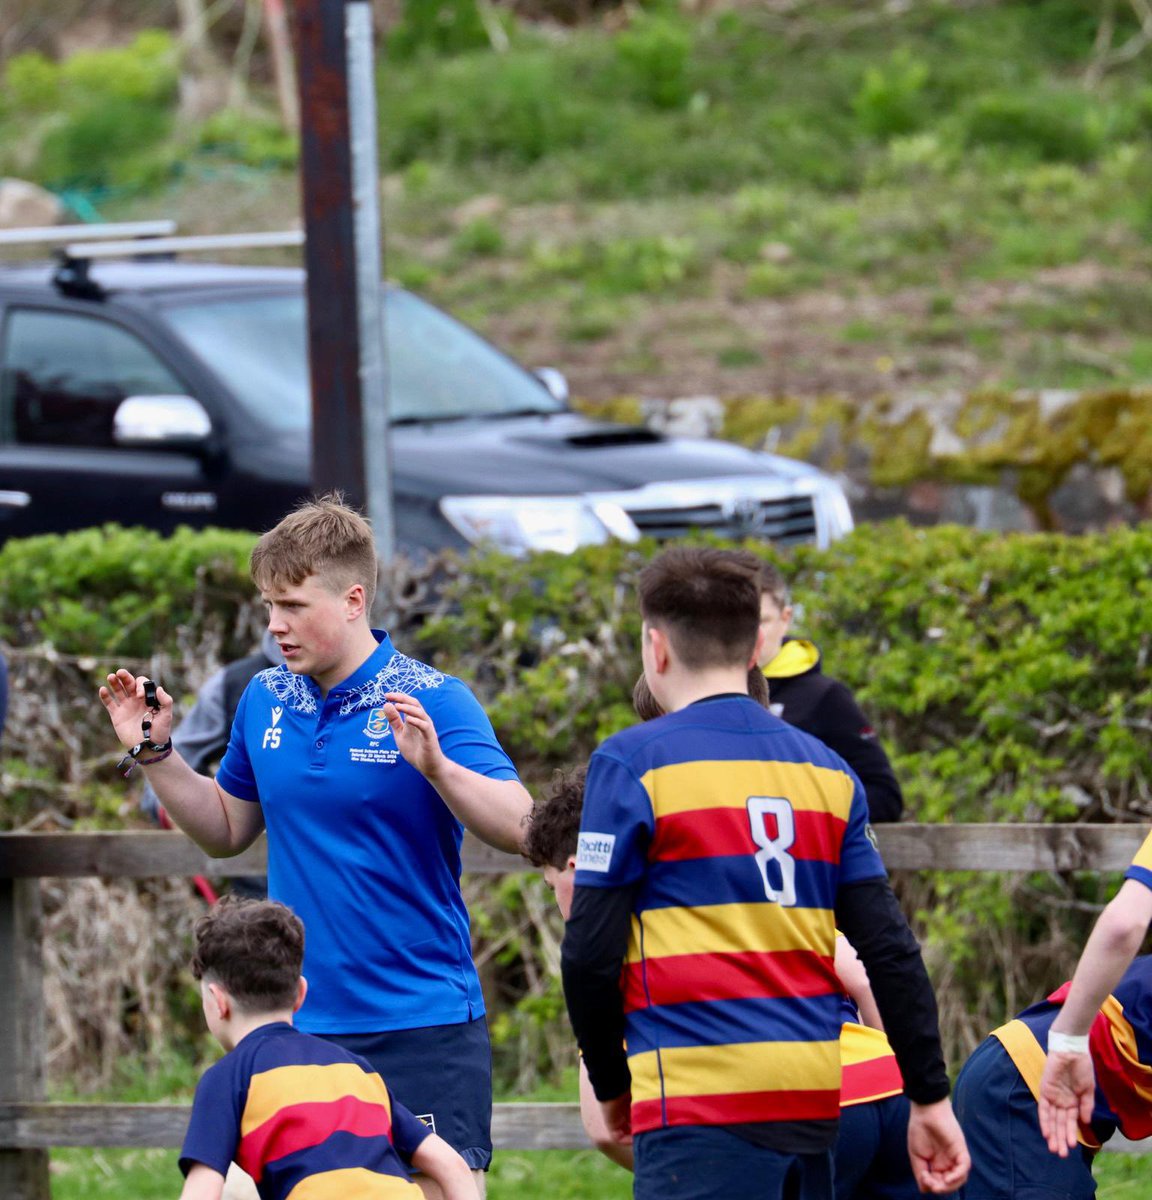 Our 15th annual charity festival - 10 clubs, over 1700 players, spectators & volunteers. One of the highlights - our remarkable @BalfronHSsport u18 players, going from P3 rugby 10 years ago to game coaching, great role models @ClubSportStlg @activestirling1 @scotrugbycoach